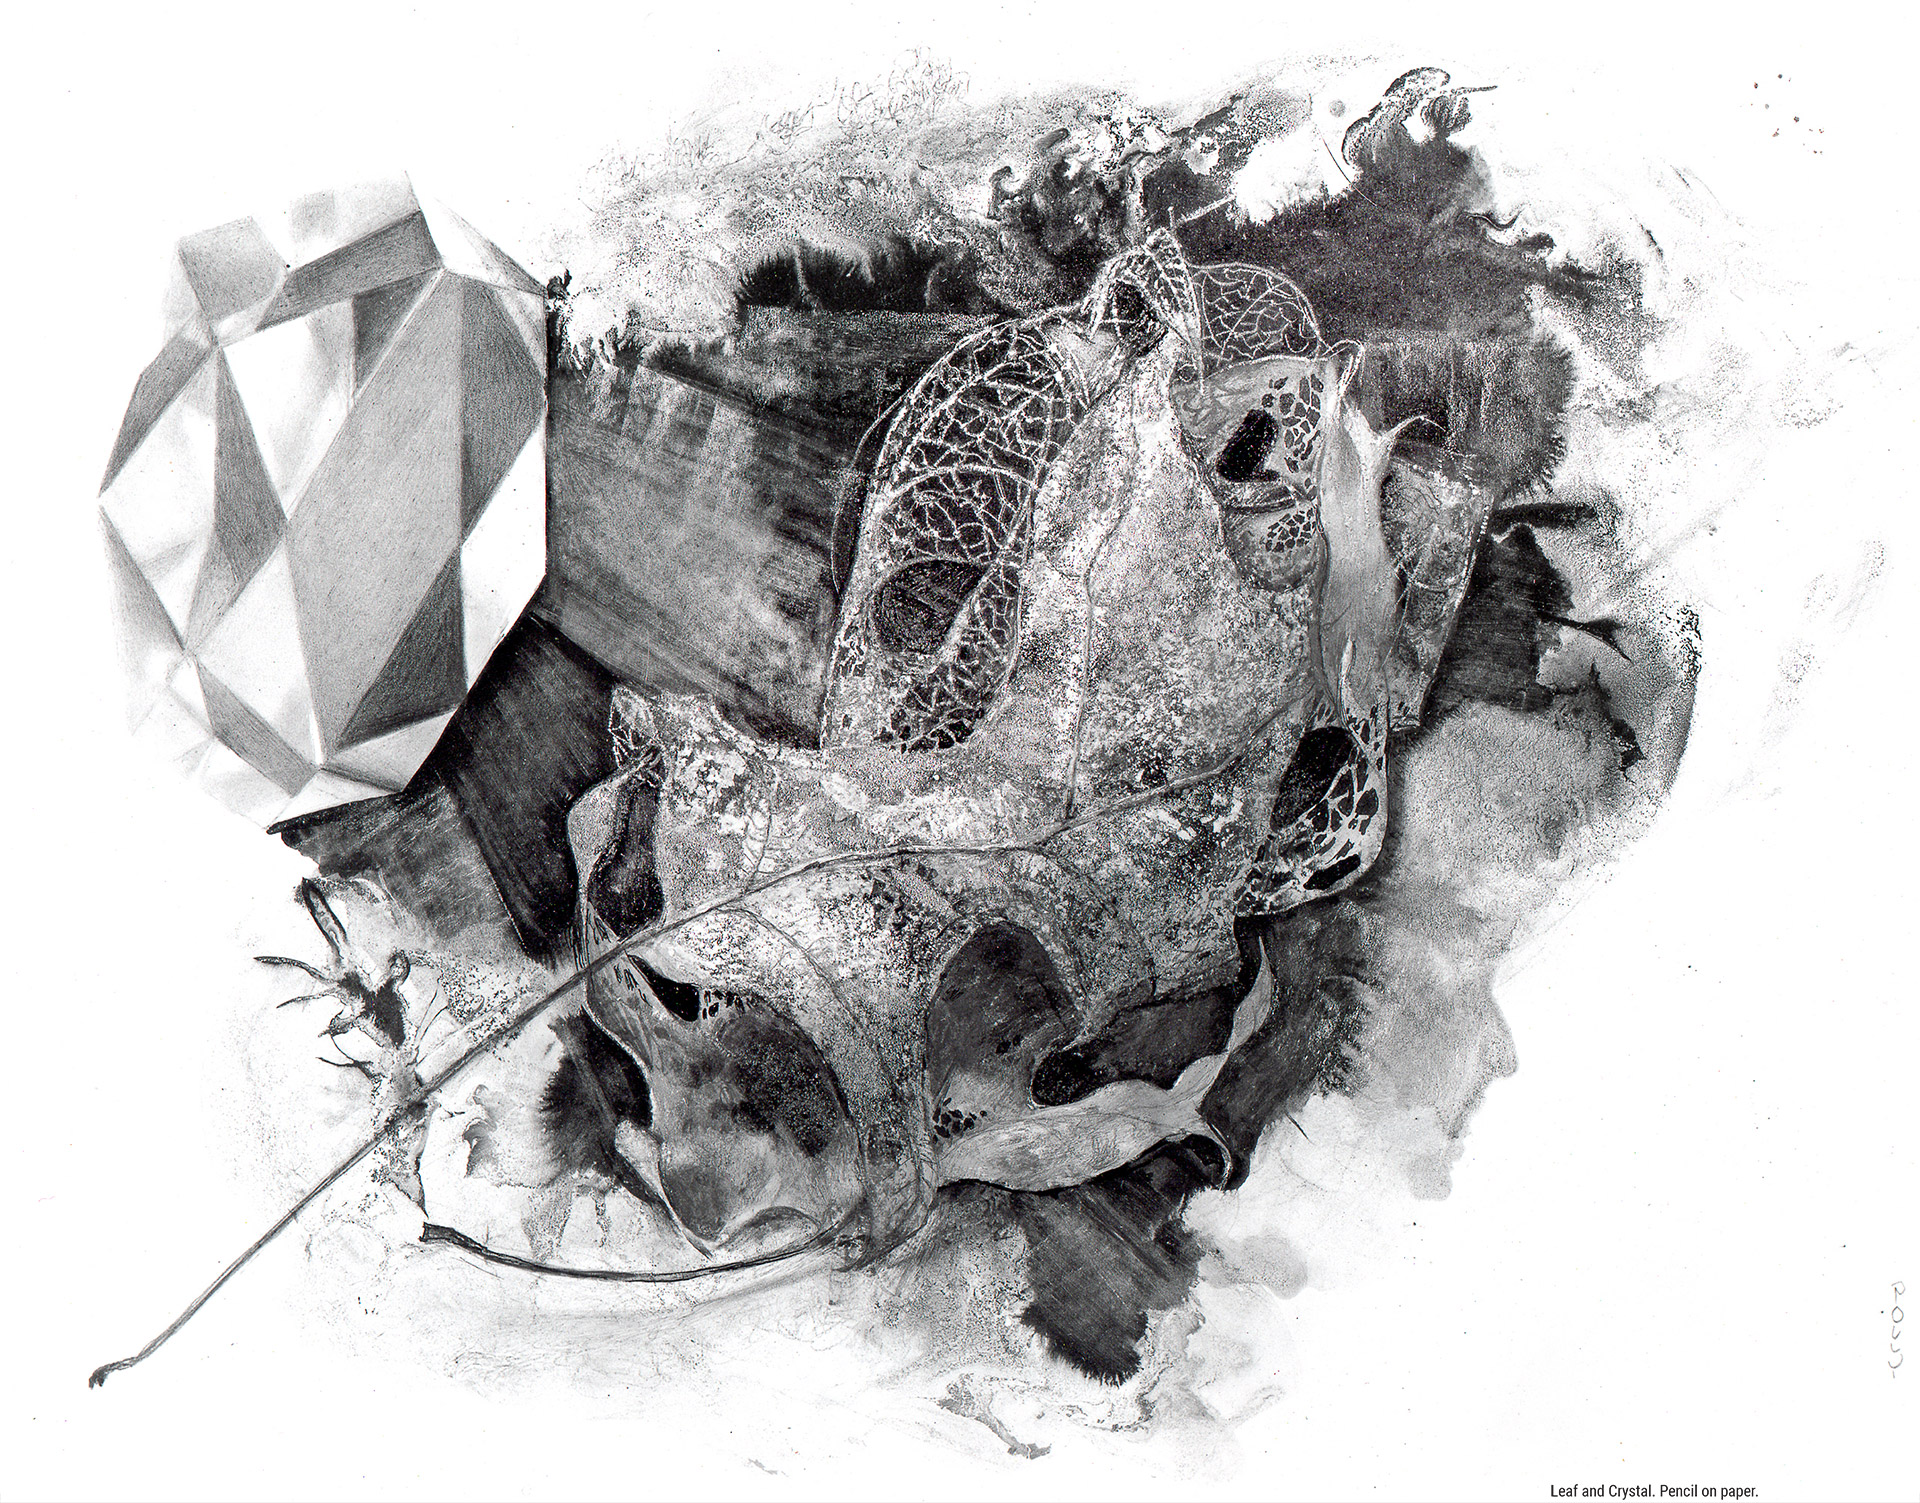 Leaf and Crystal. Pencil on paper.